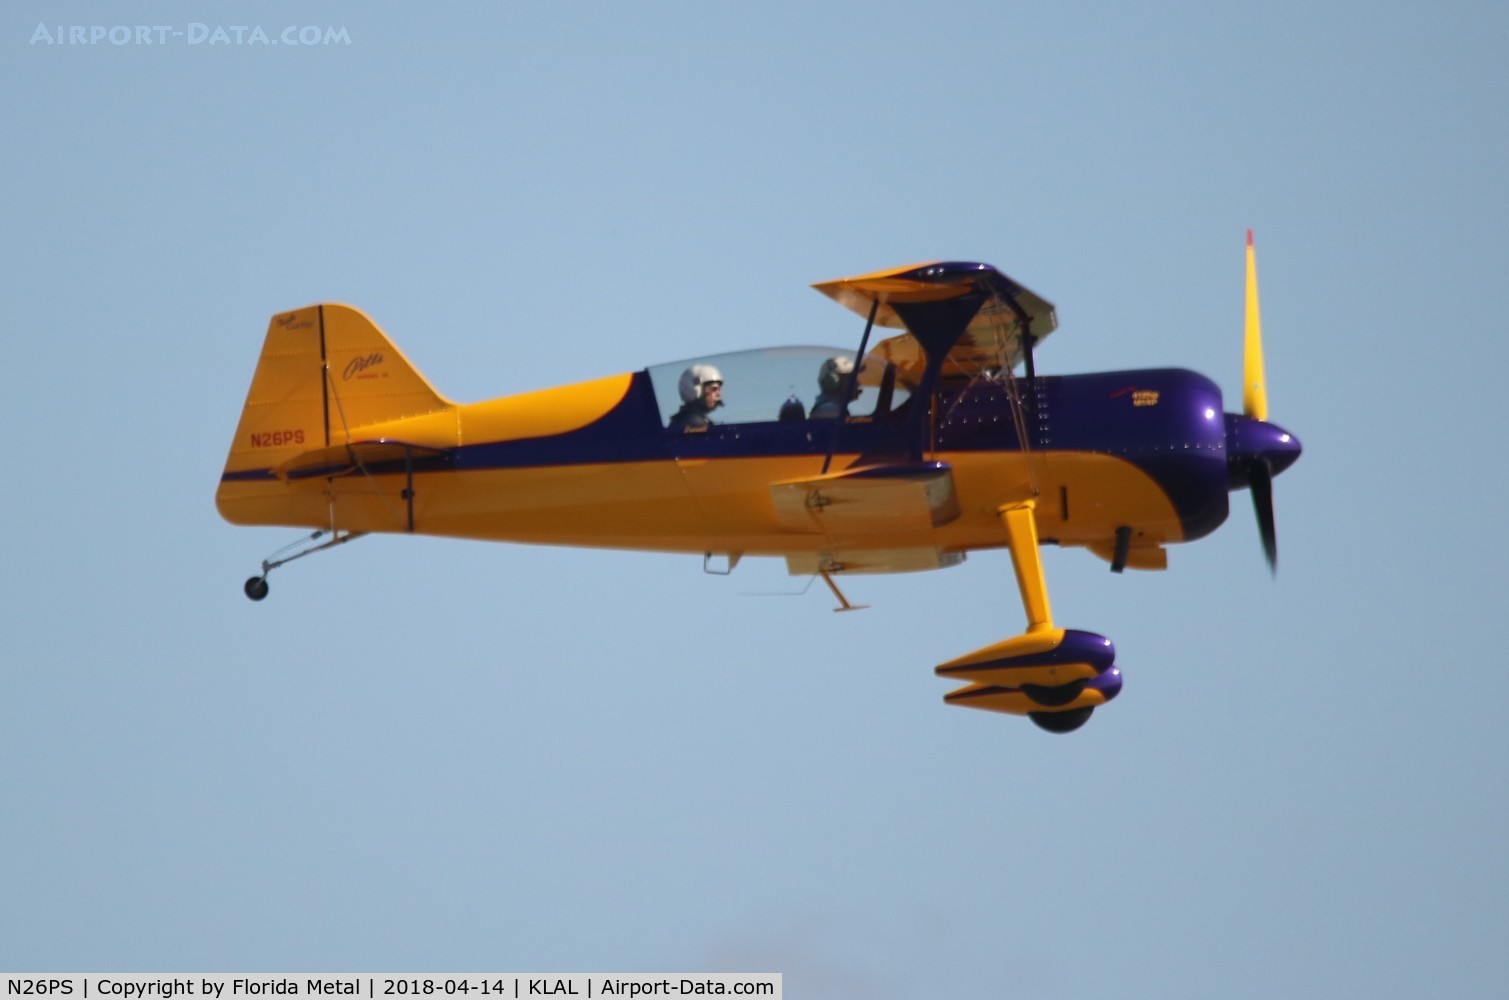 N26PS, Pitts Model 12 C/N 298, Pitts 12 zx